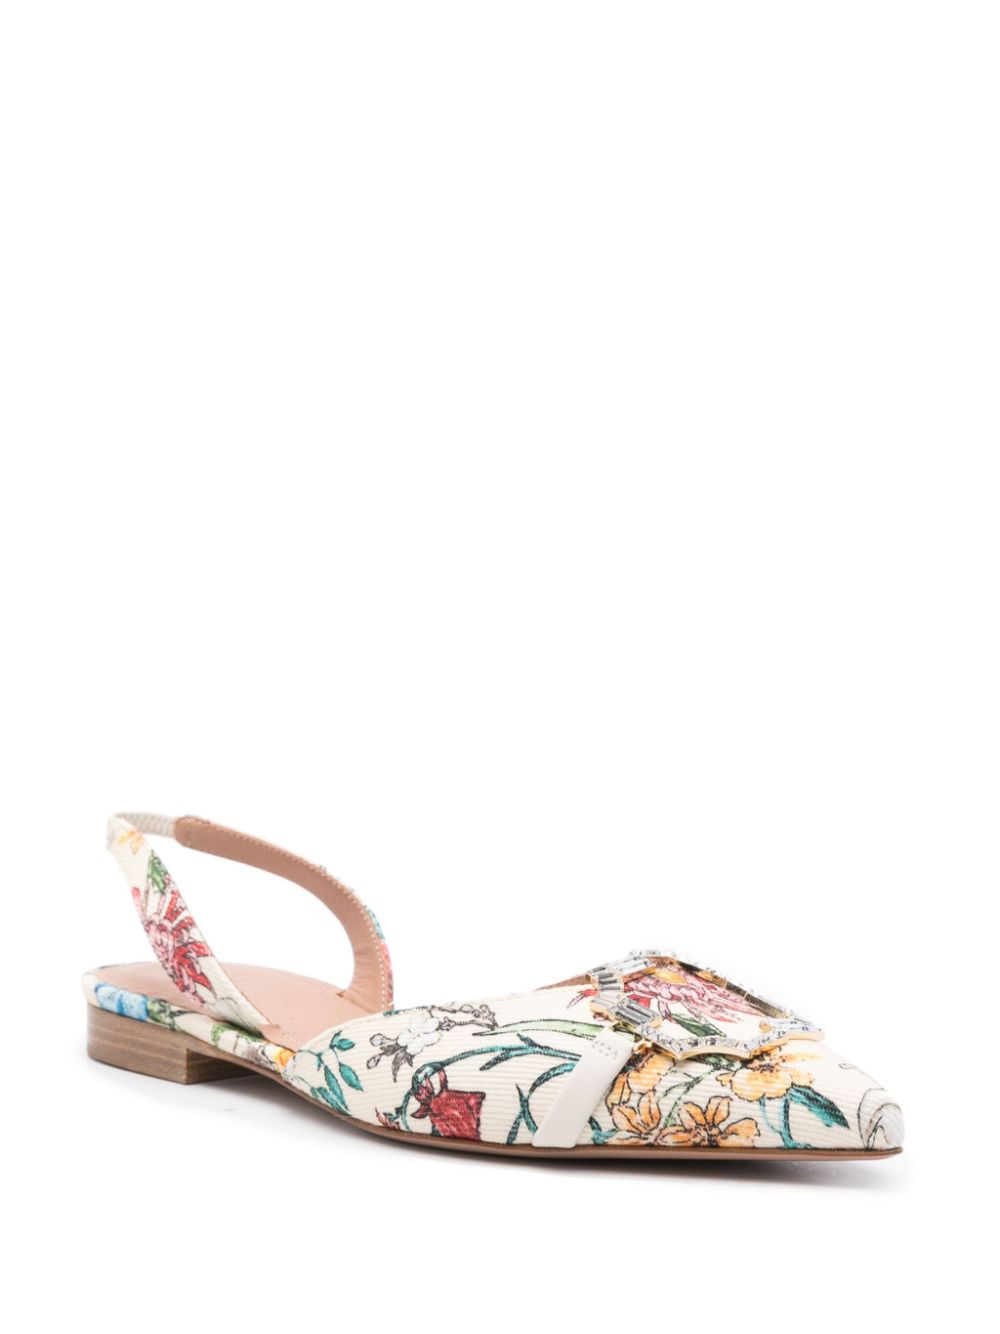 Malone Souliers MALONE SOULIERS- Misha Printed Canvas Slingback Ballet Flats